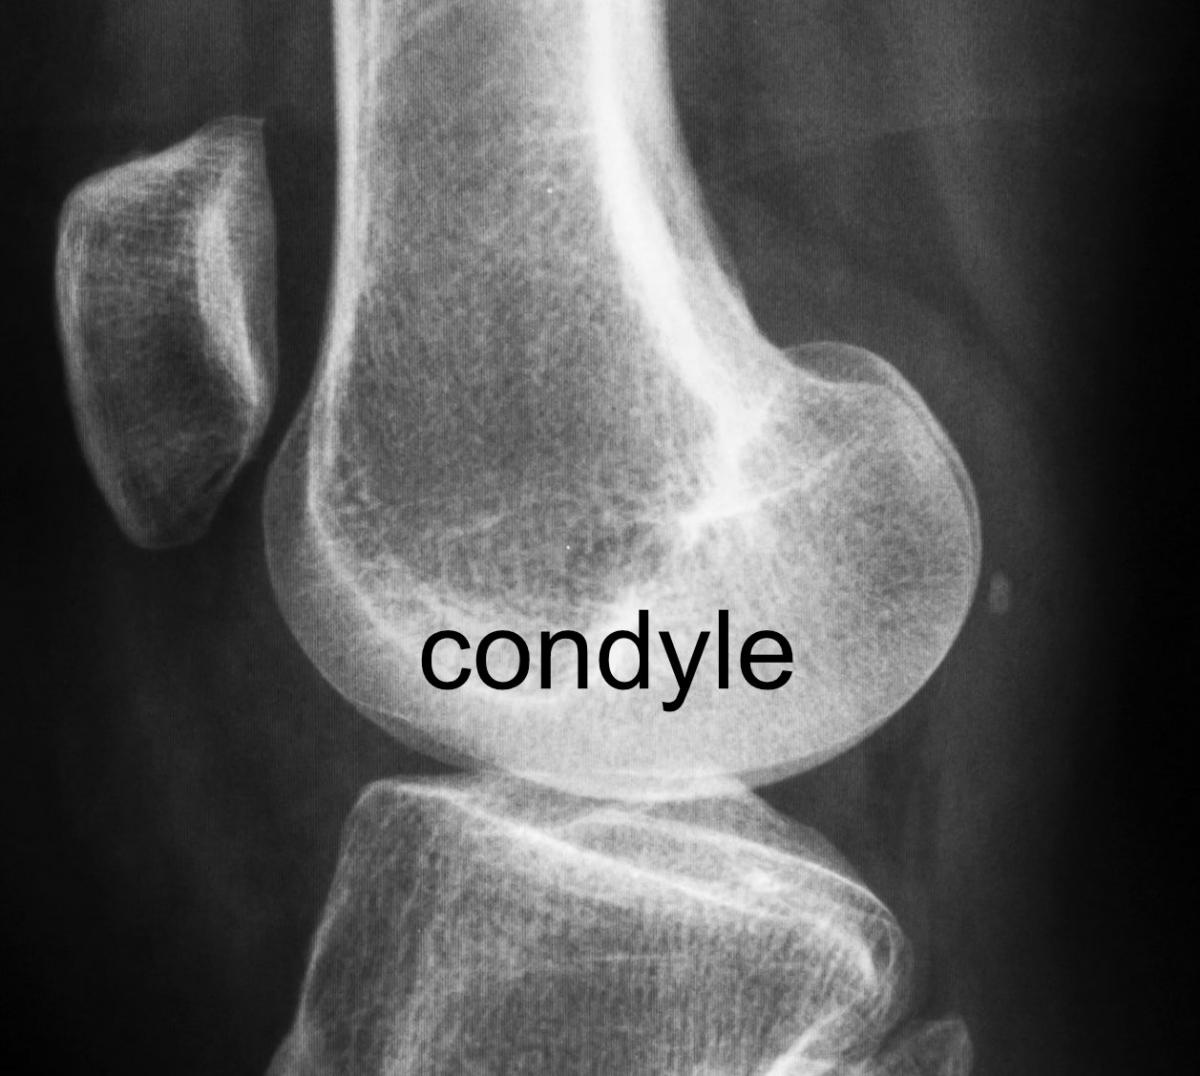 rounded condyles of femur